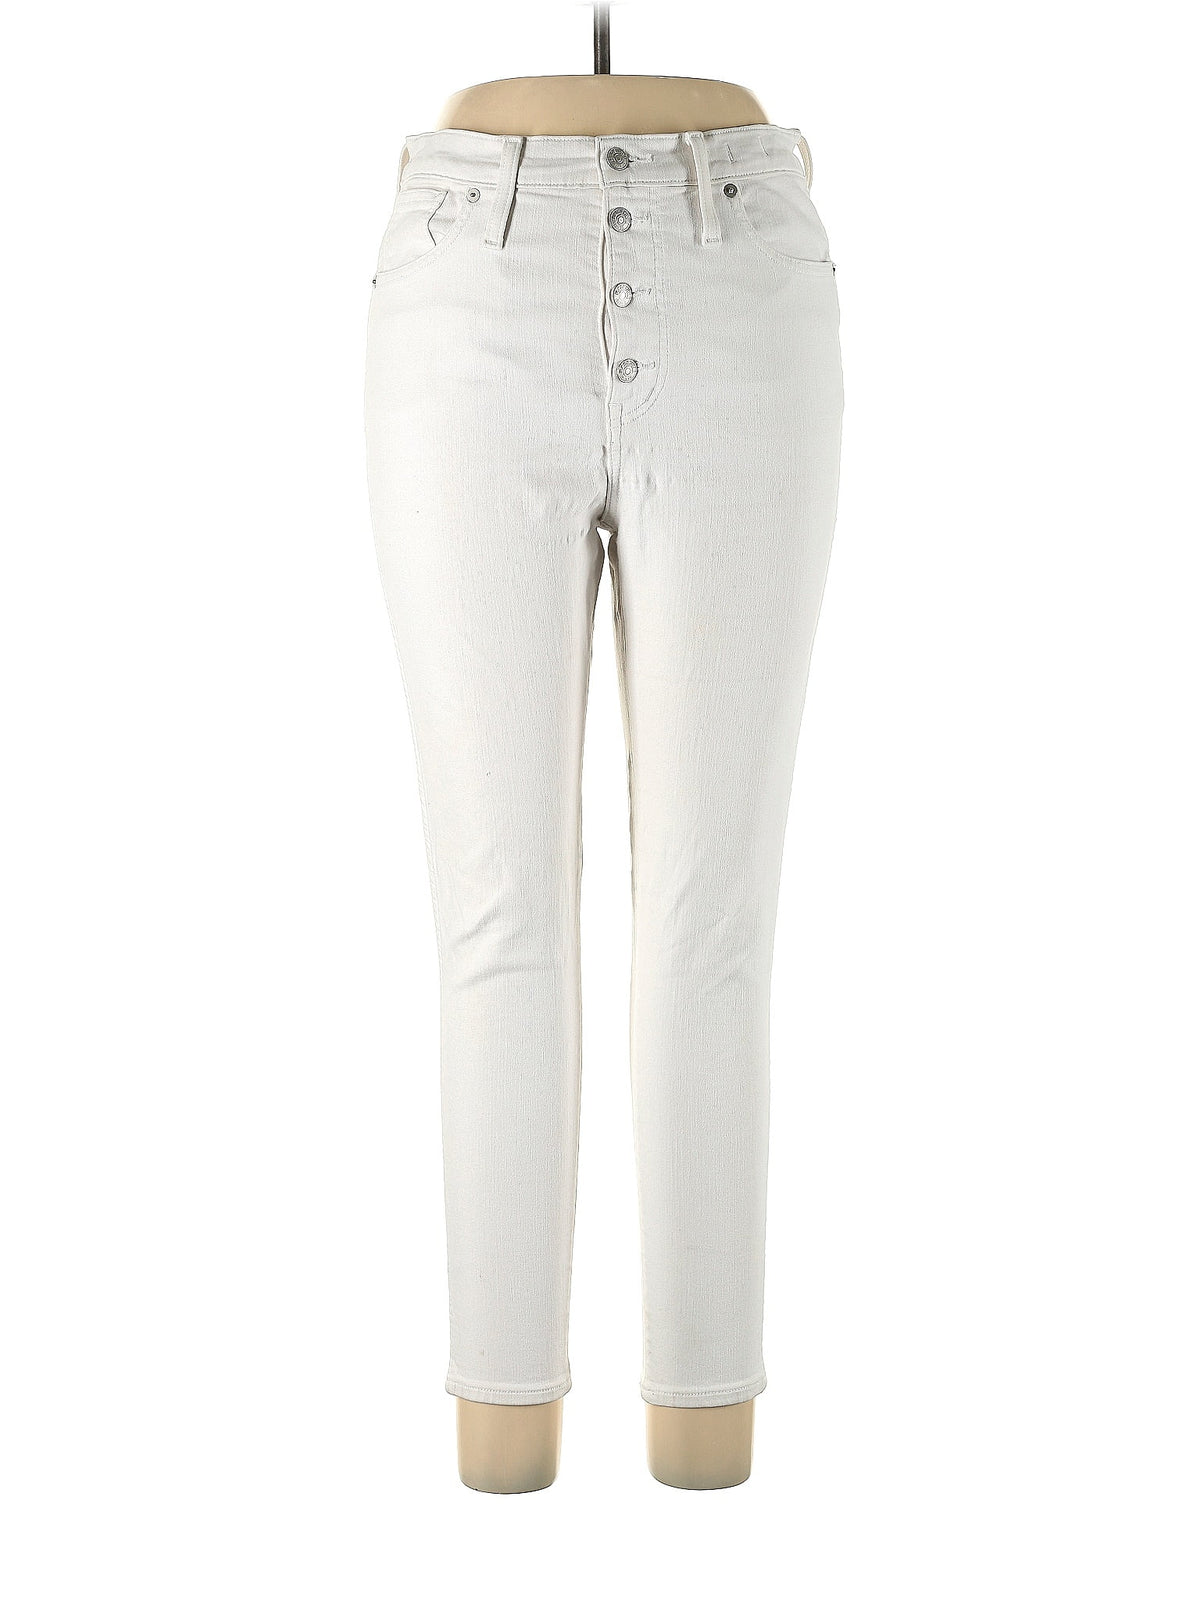 High-Rise Boyjeans 10" High-Rise Skinny Crop Jeans In Pure White: Button-Front Edition in Light Wash waist size - 31